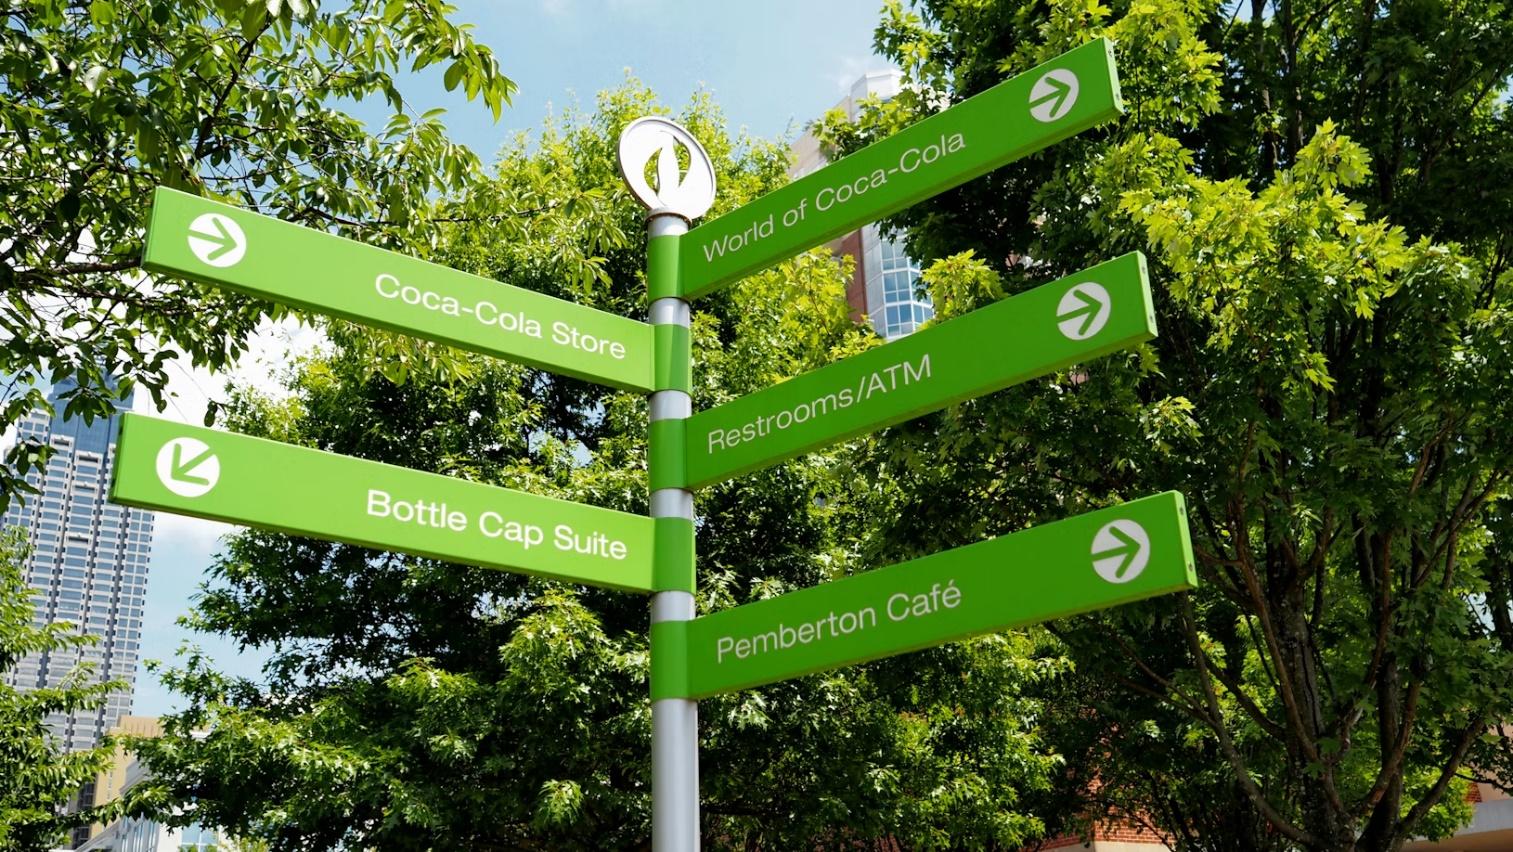 The picture shows a direction sign board at Centennial Olympic Park, a free thing to do in Atlanta.  